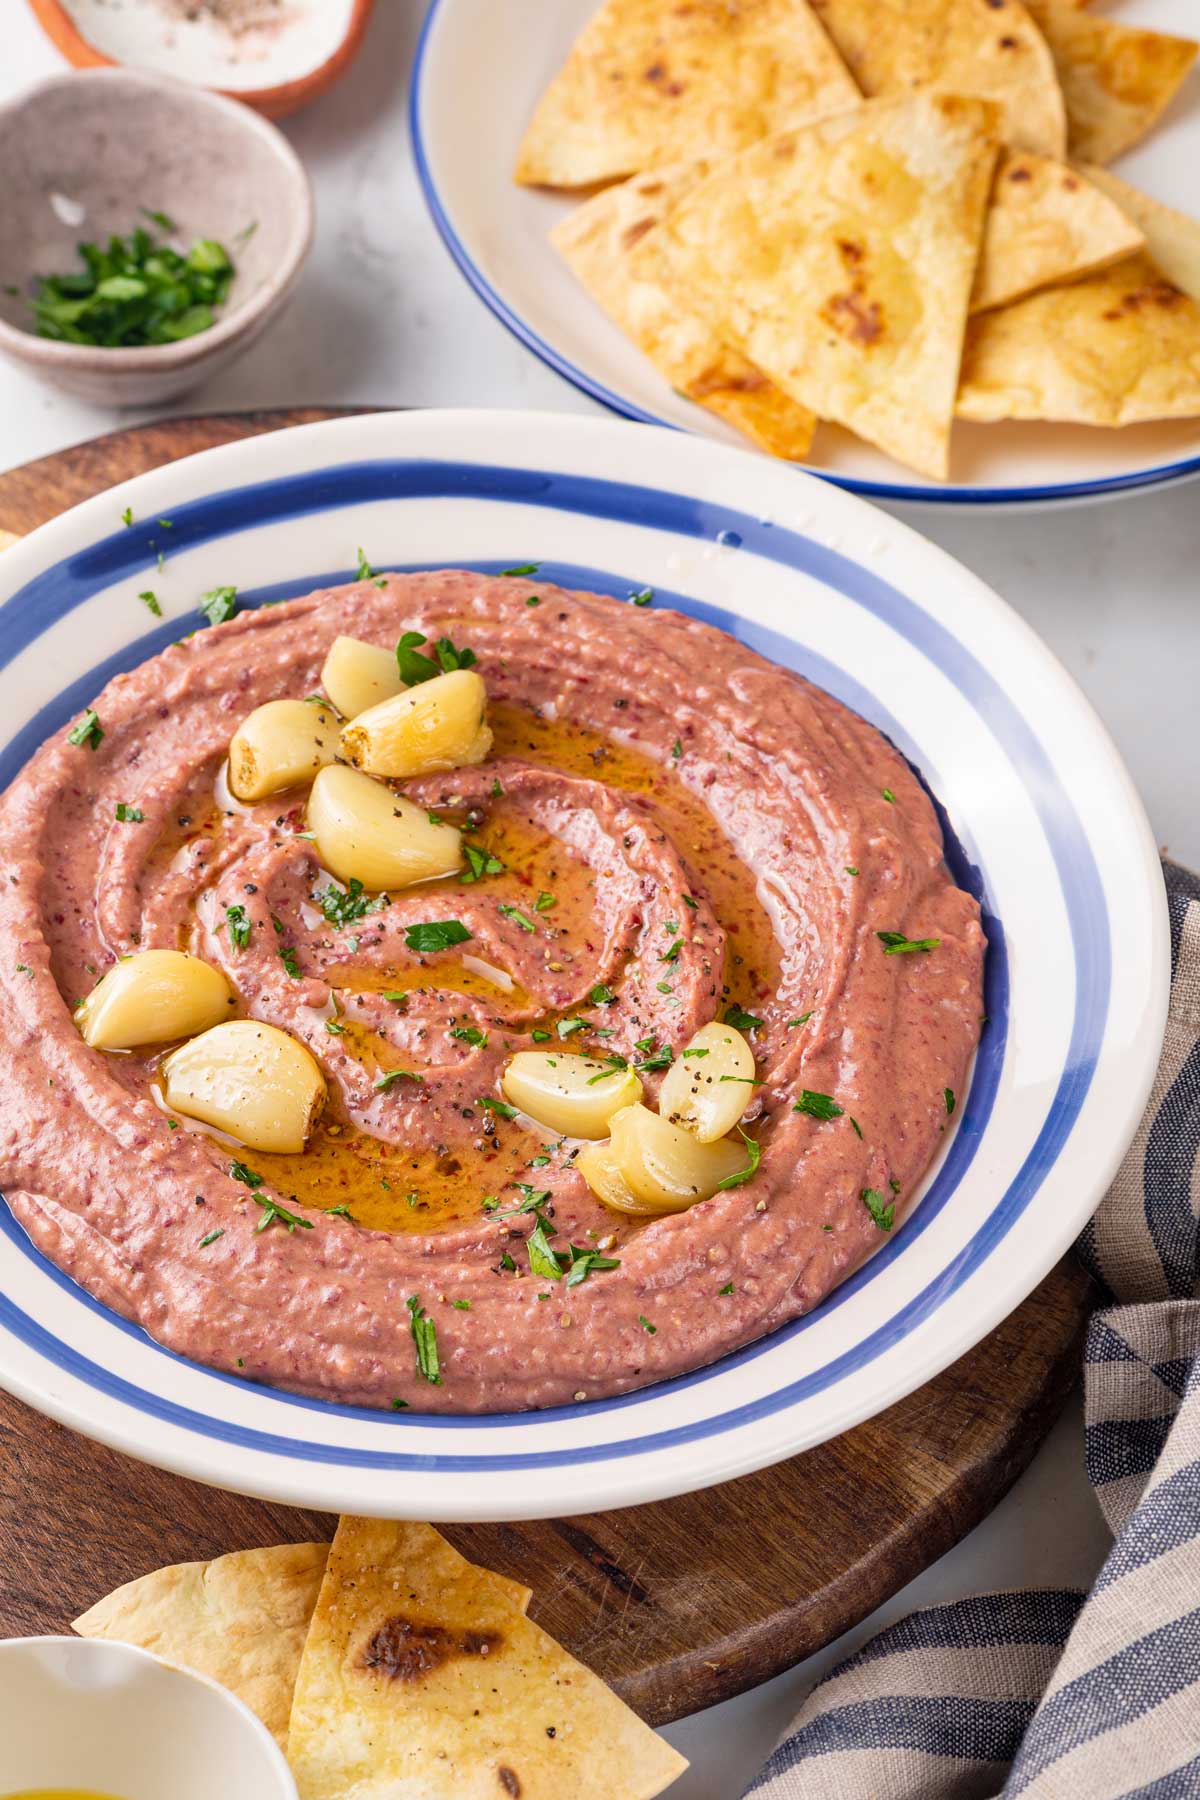 Kidney bean hummus with roasted garlic in a serving bowl